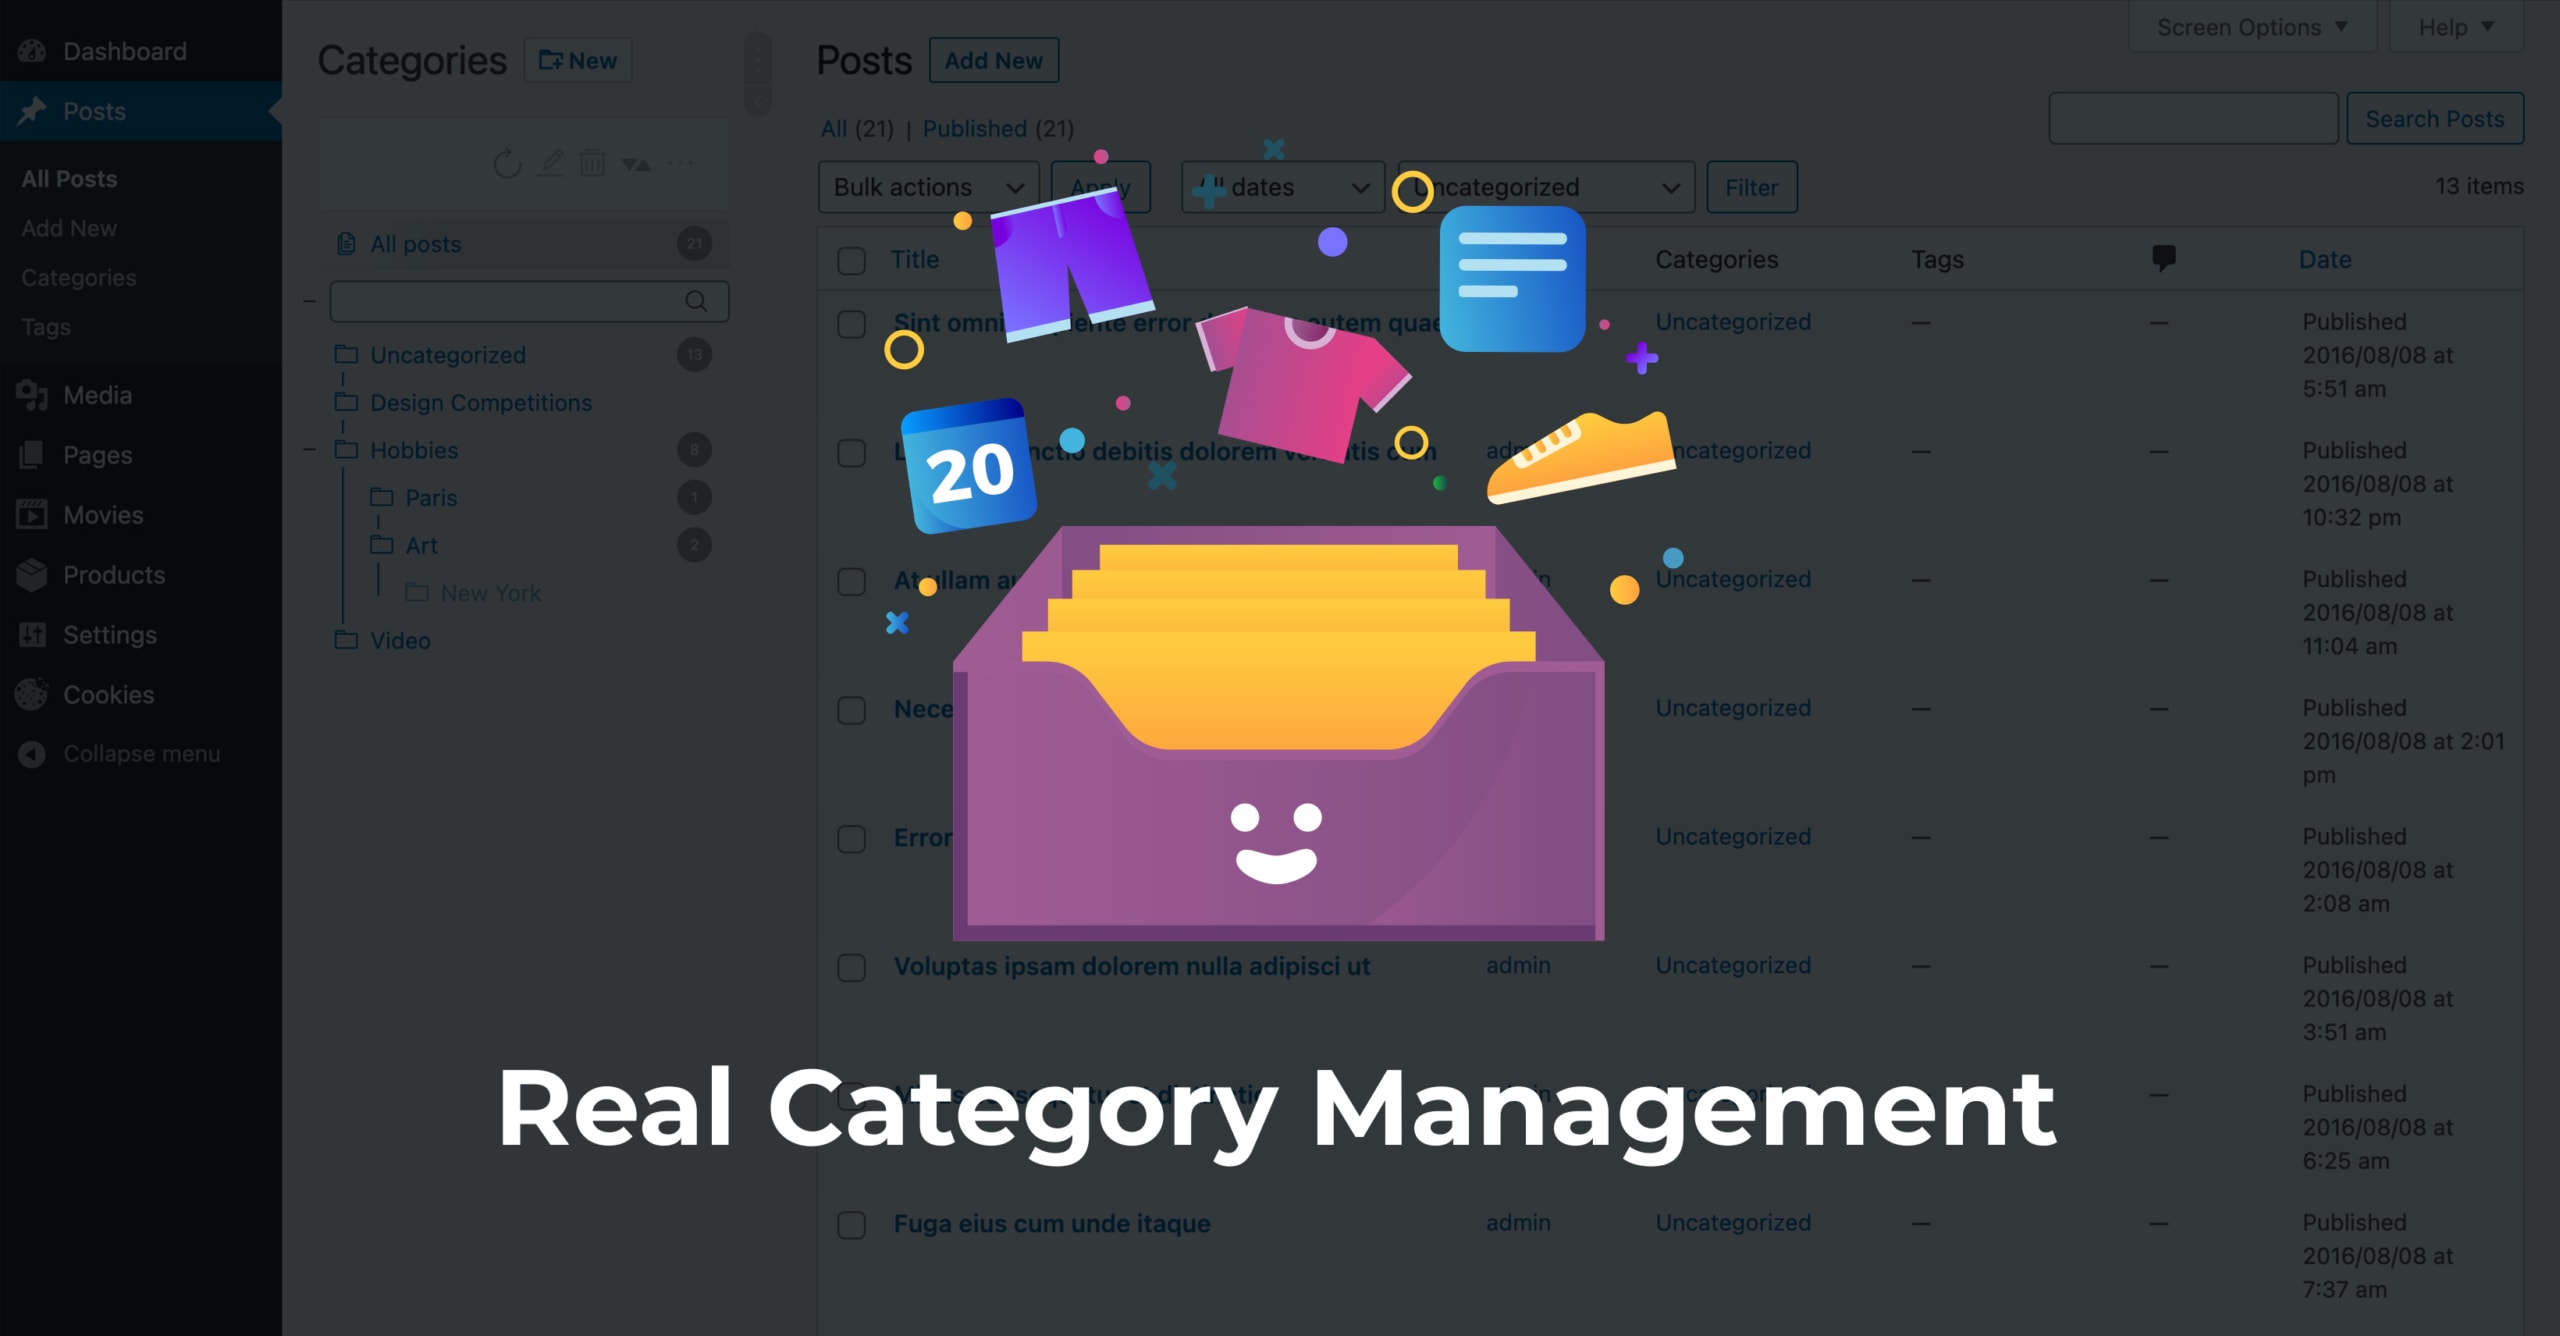 Real Category Management Content